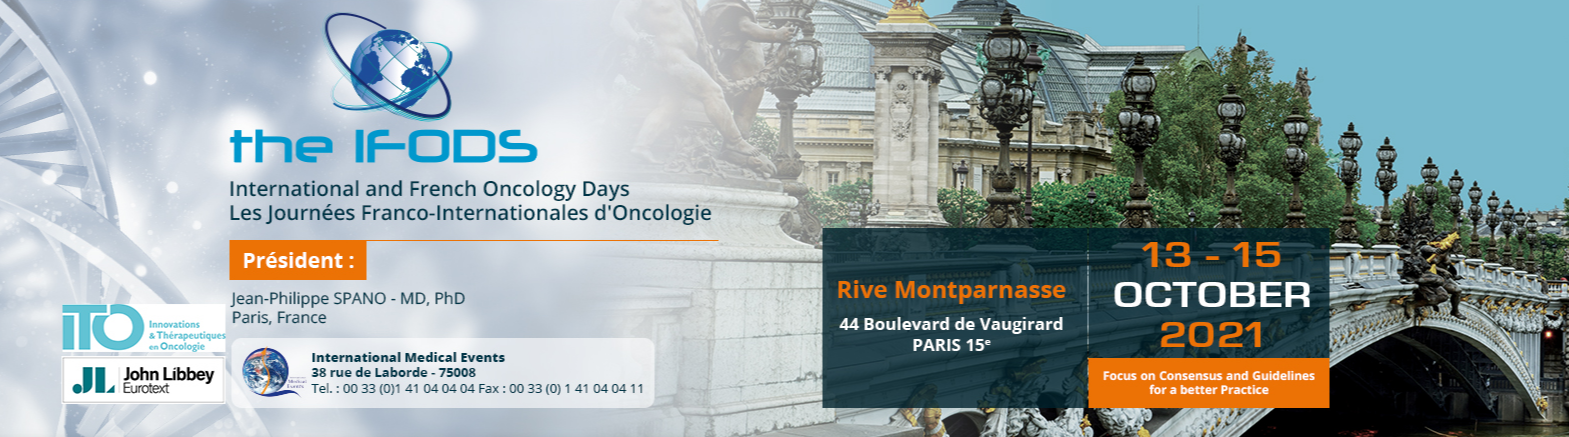 International and French Oncology Days - IFODS 2021